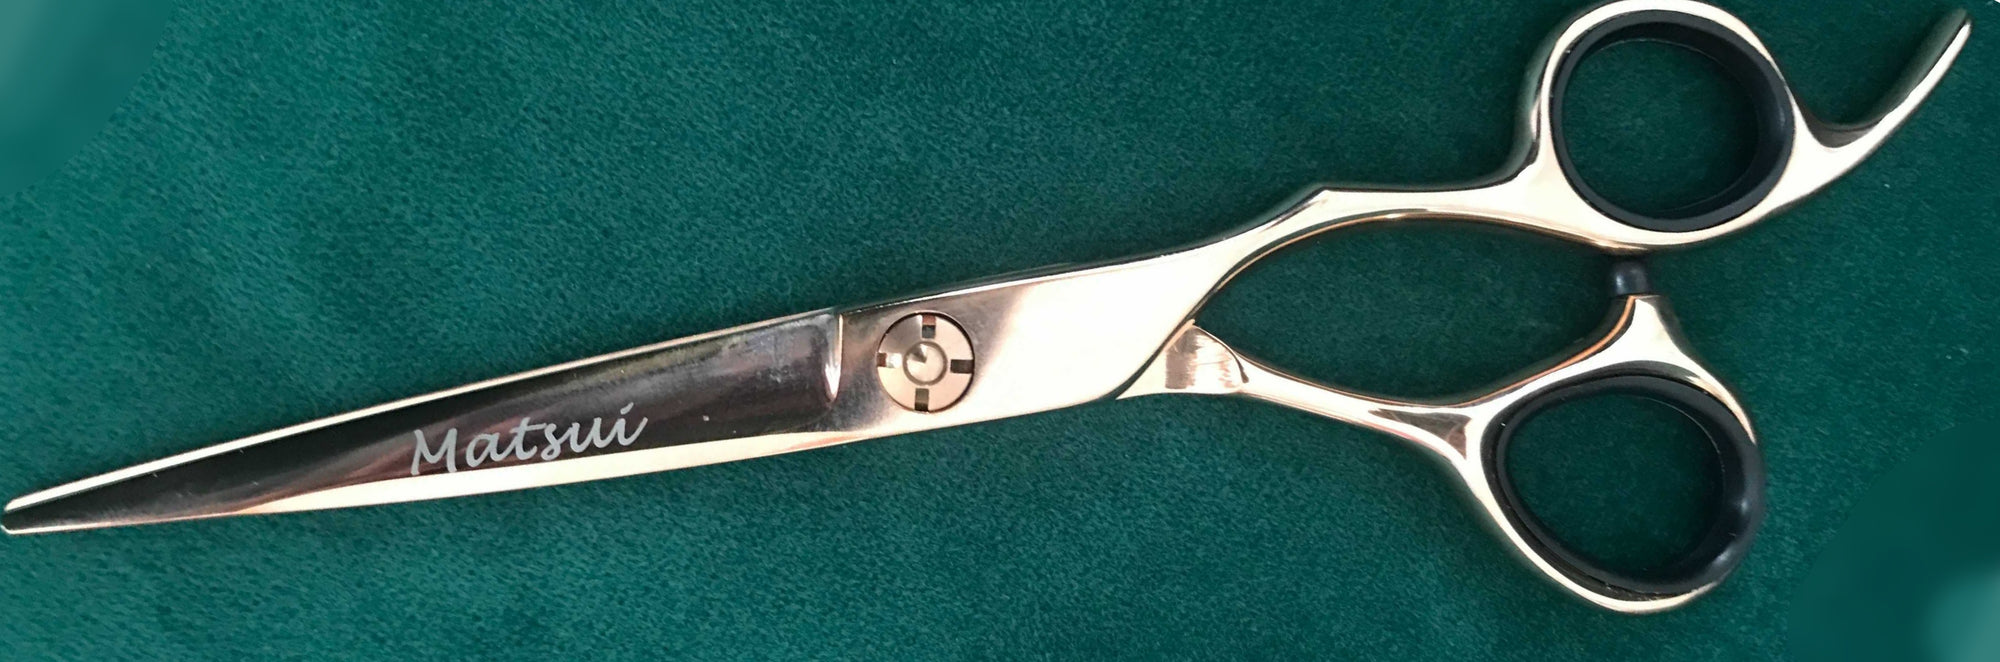 How To Tell If Your Hair Cutting Scissors Need A Sharpen